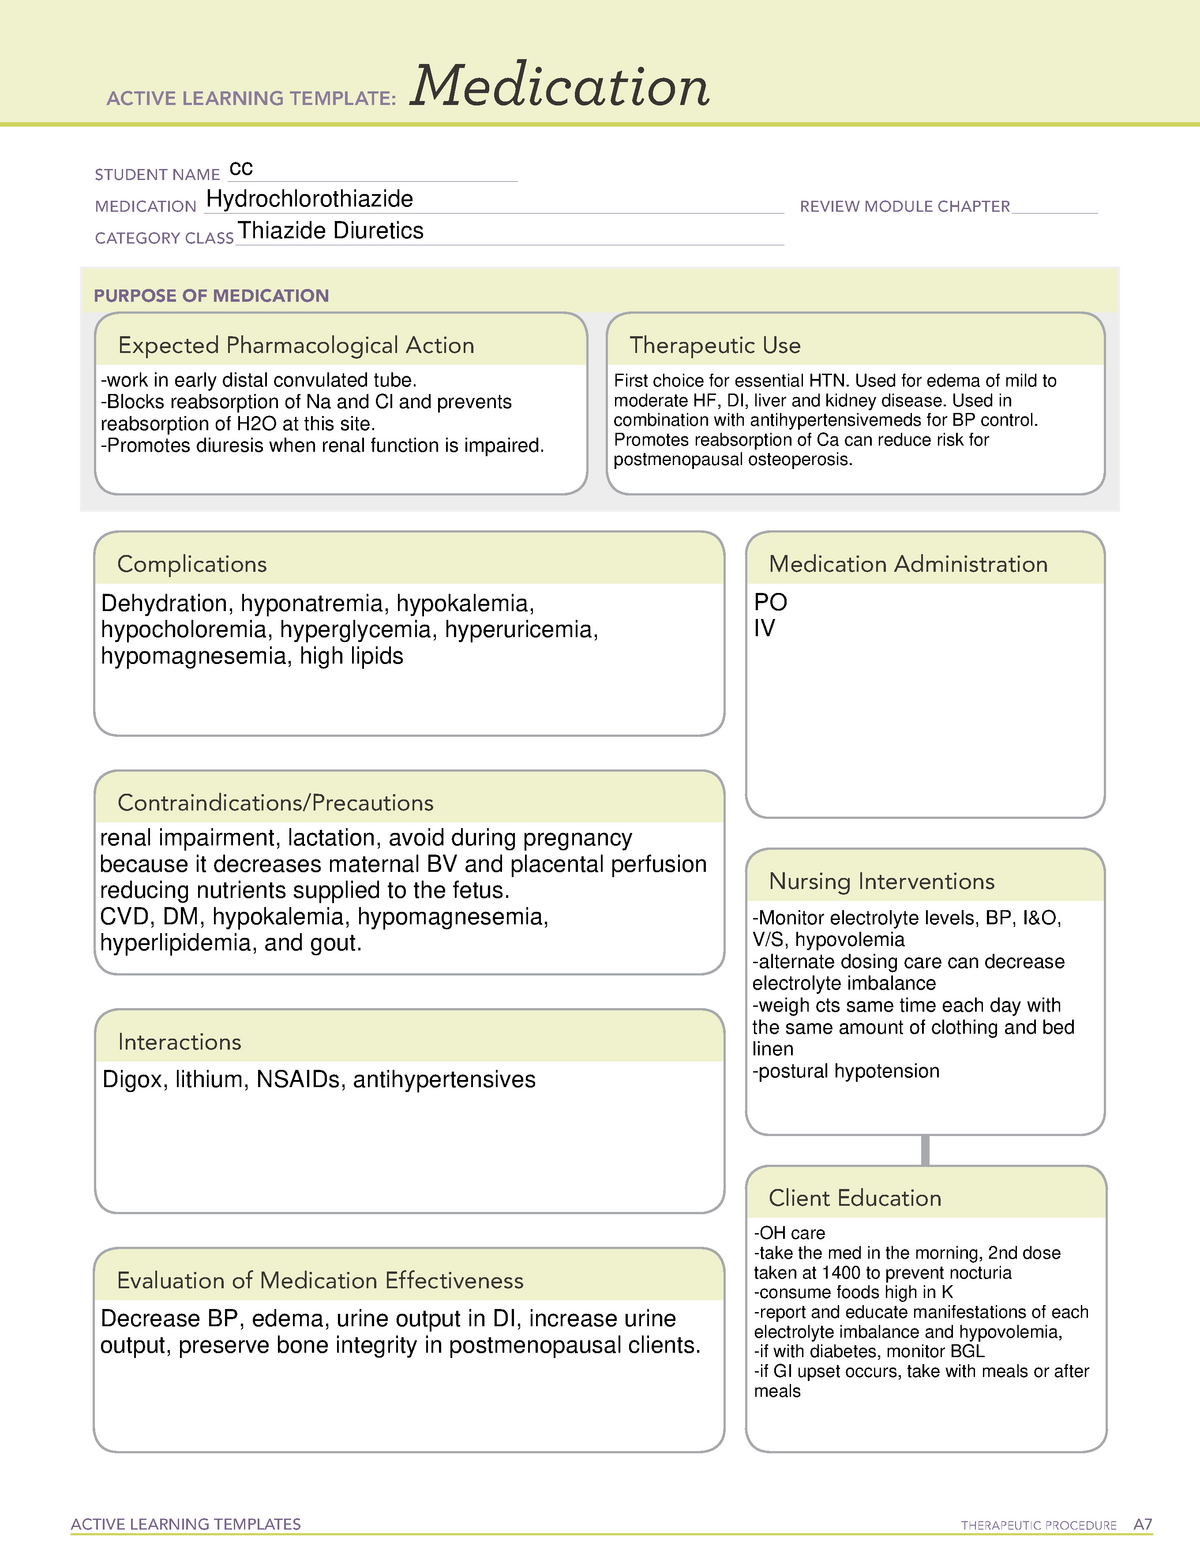 thiazide-ati-active-learning-templates-therapeutic-procedure-a